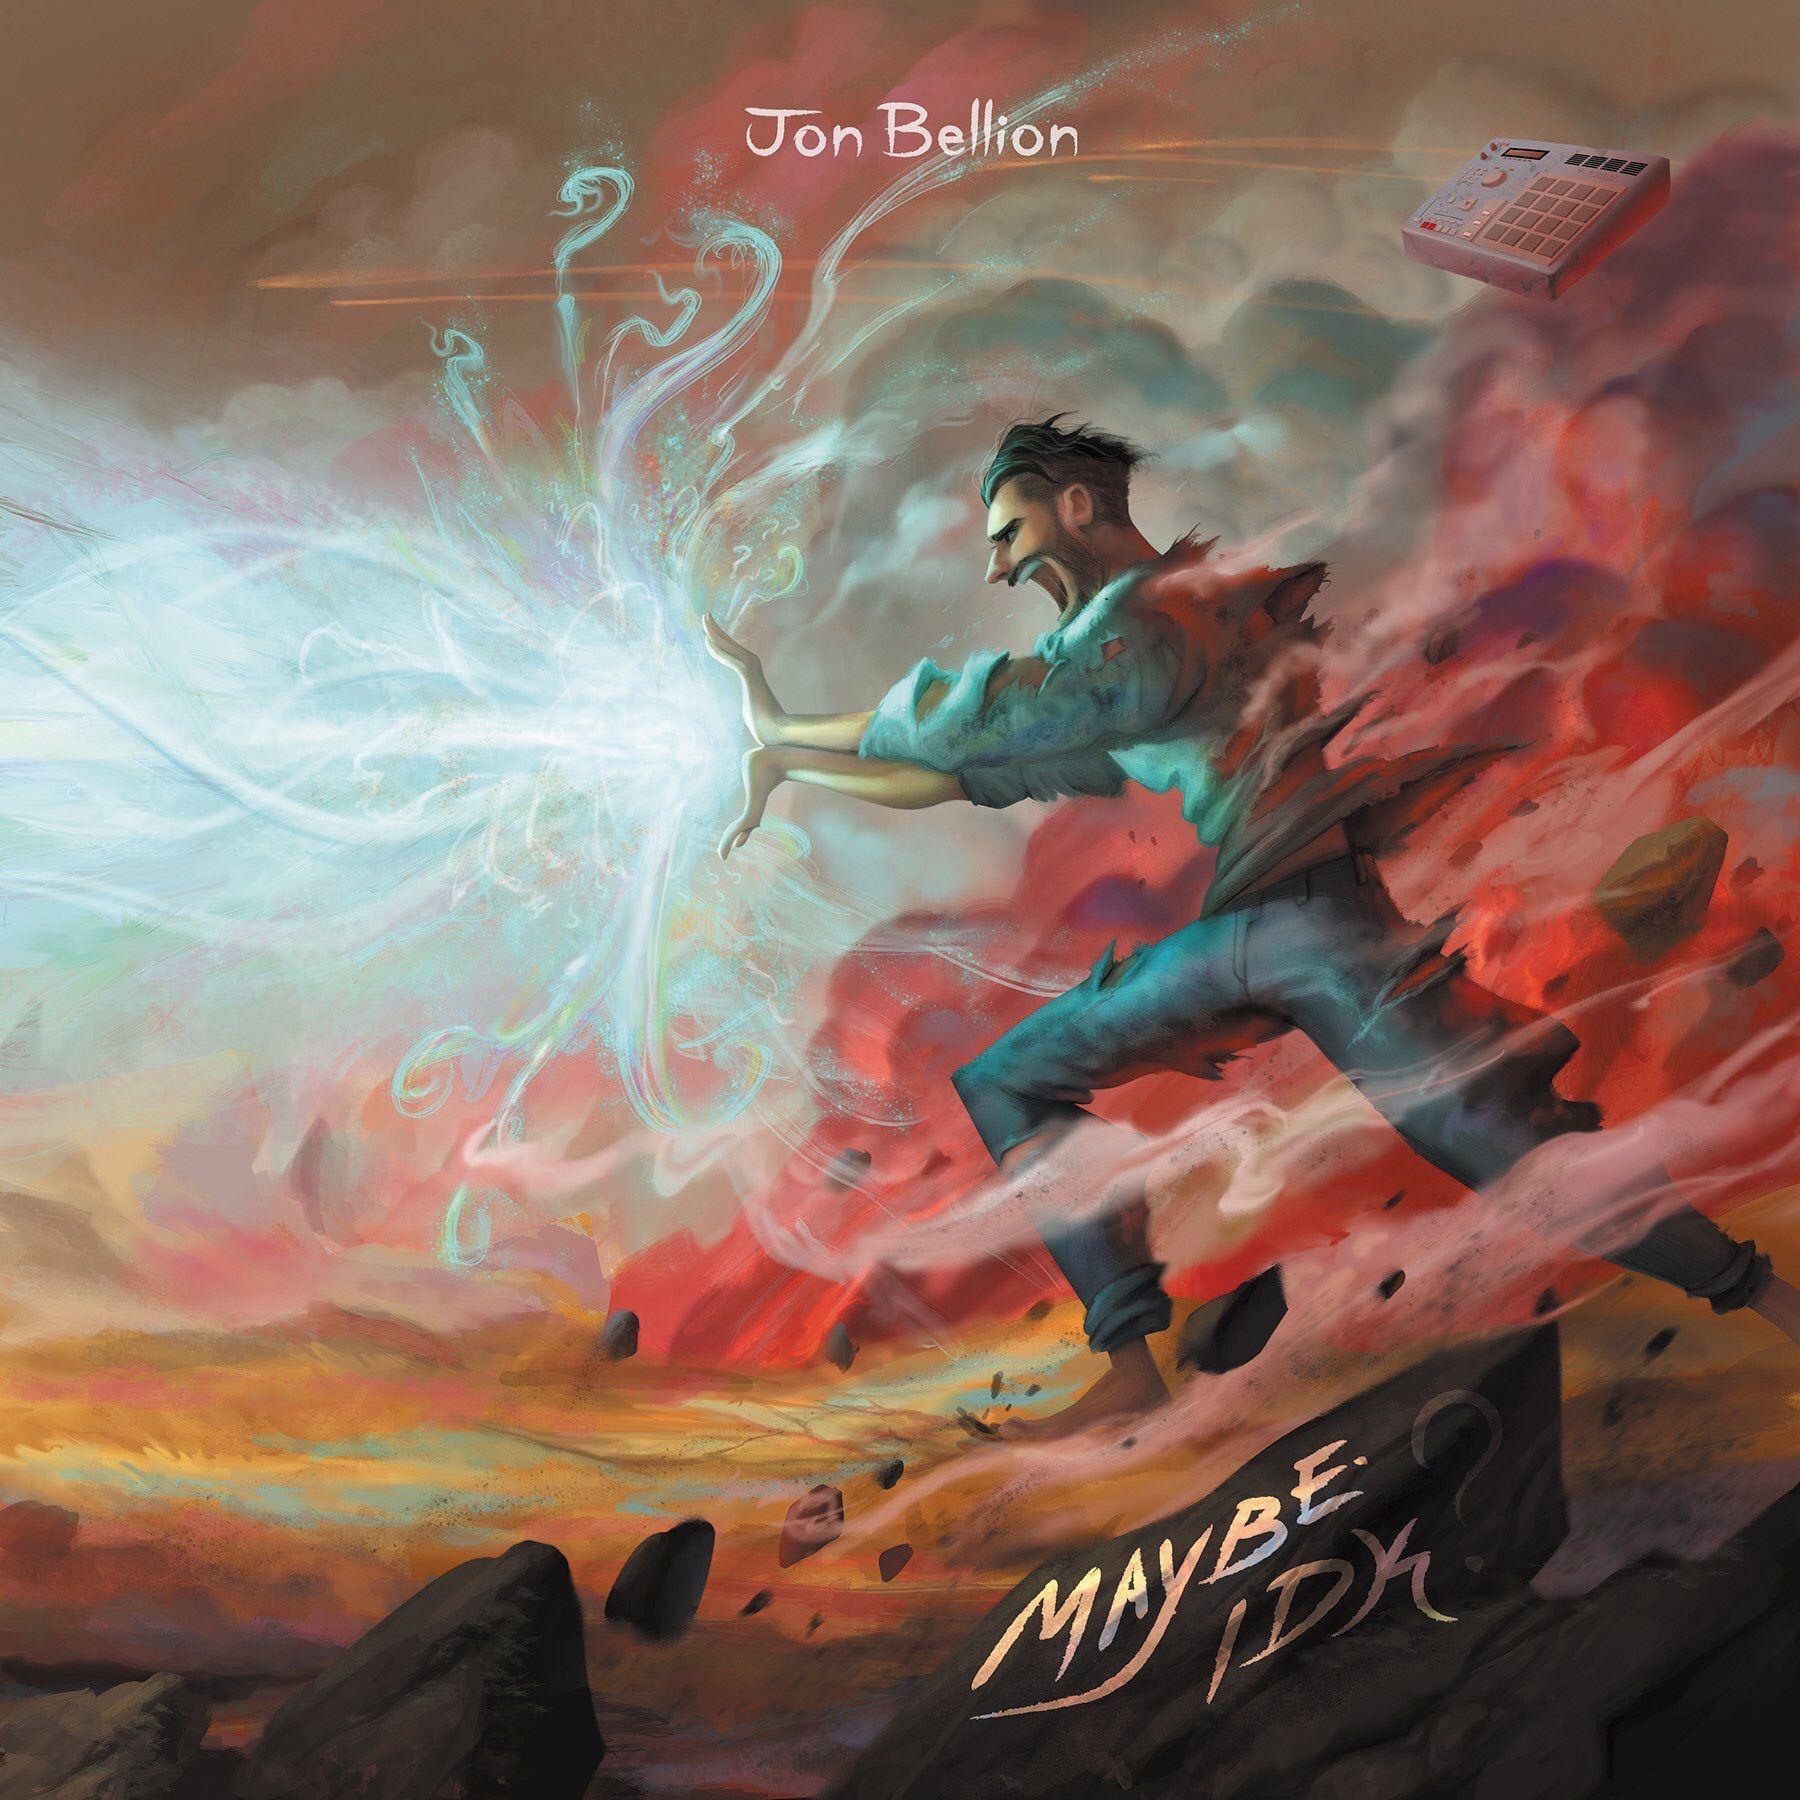 The incredible cover art from Jon Bellion's new album The Human